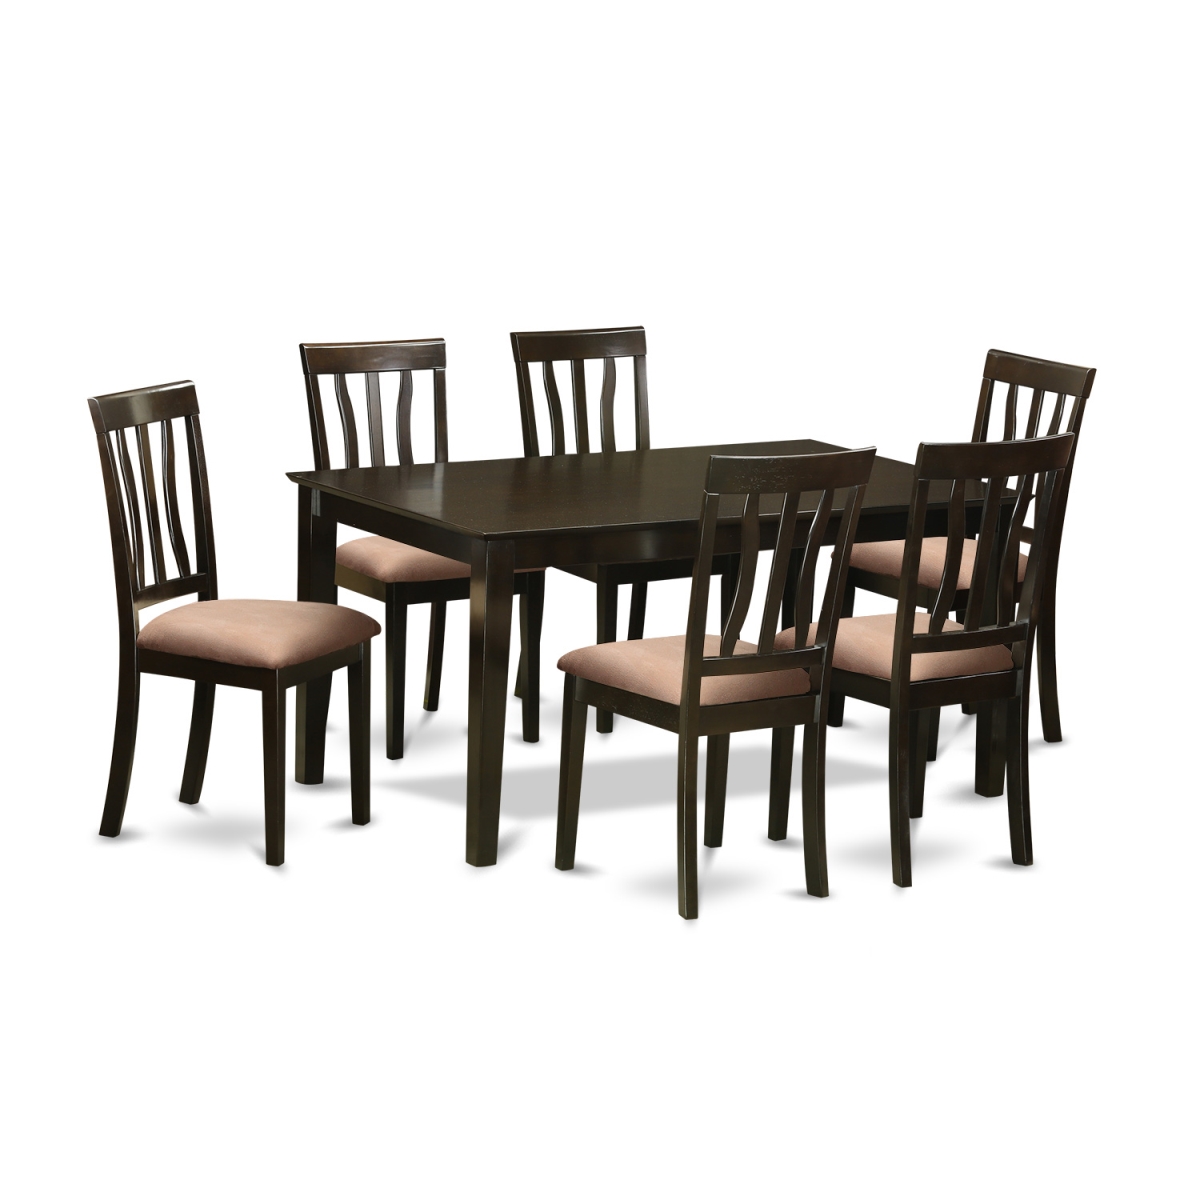 CAAN7-CAP-C Dining Table Set with 6 Dining Room Table & 6 Chairs, Cappuccino - 7 Piece -  East West Furniture